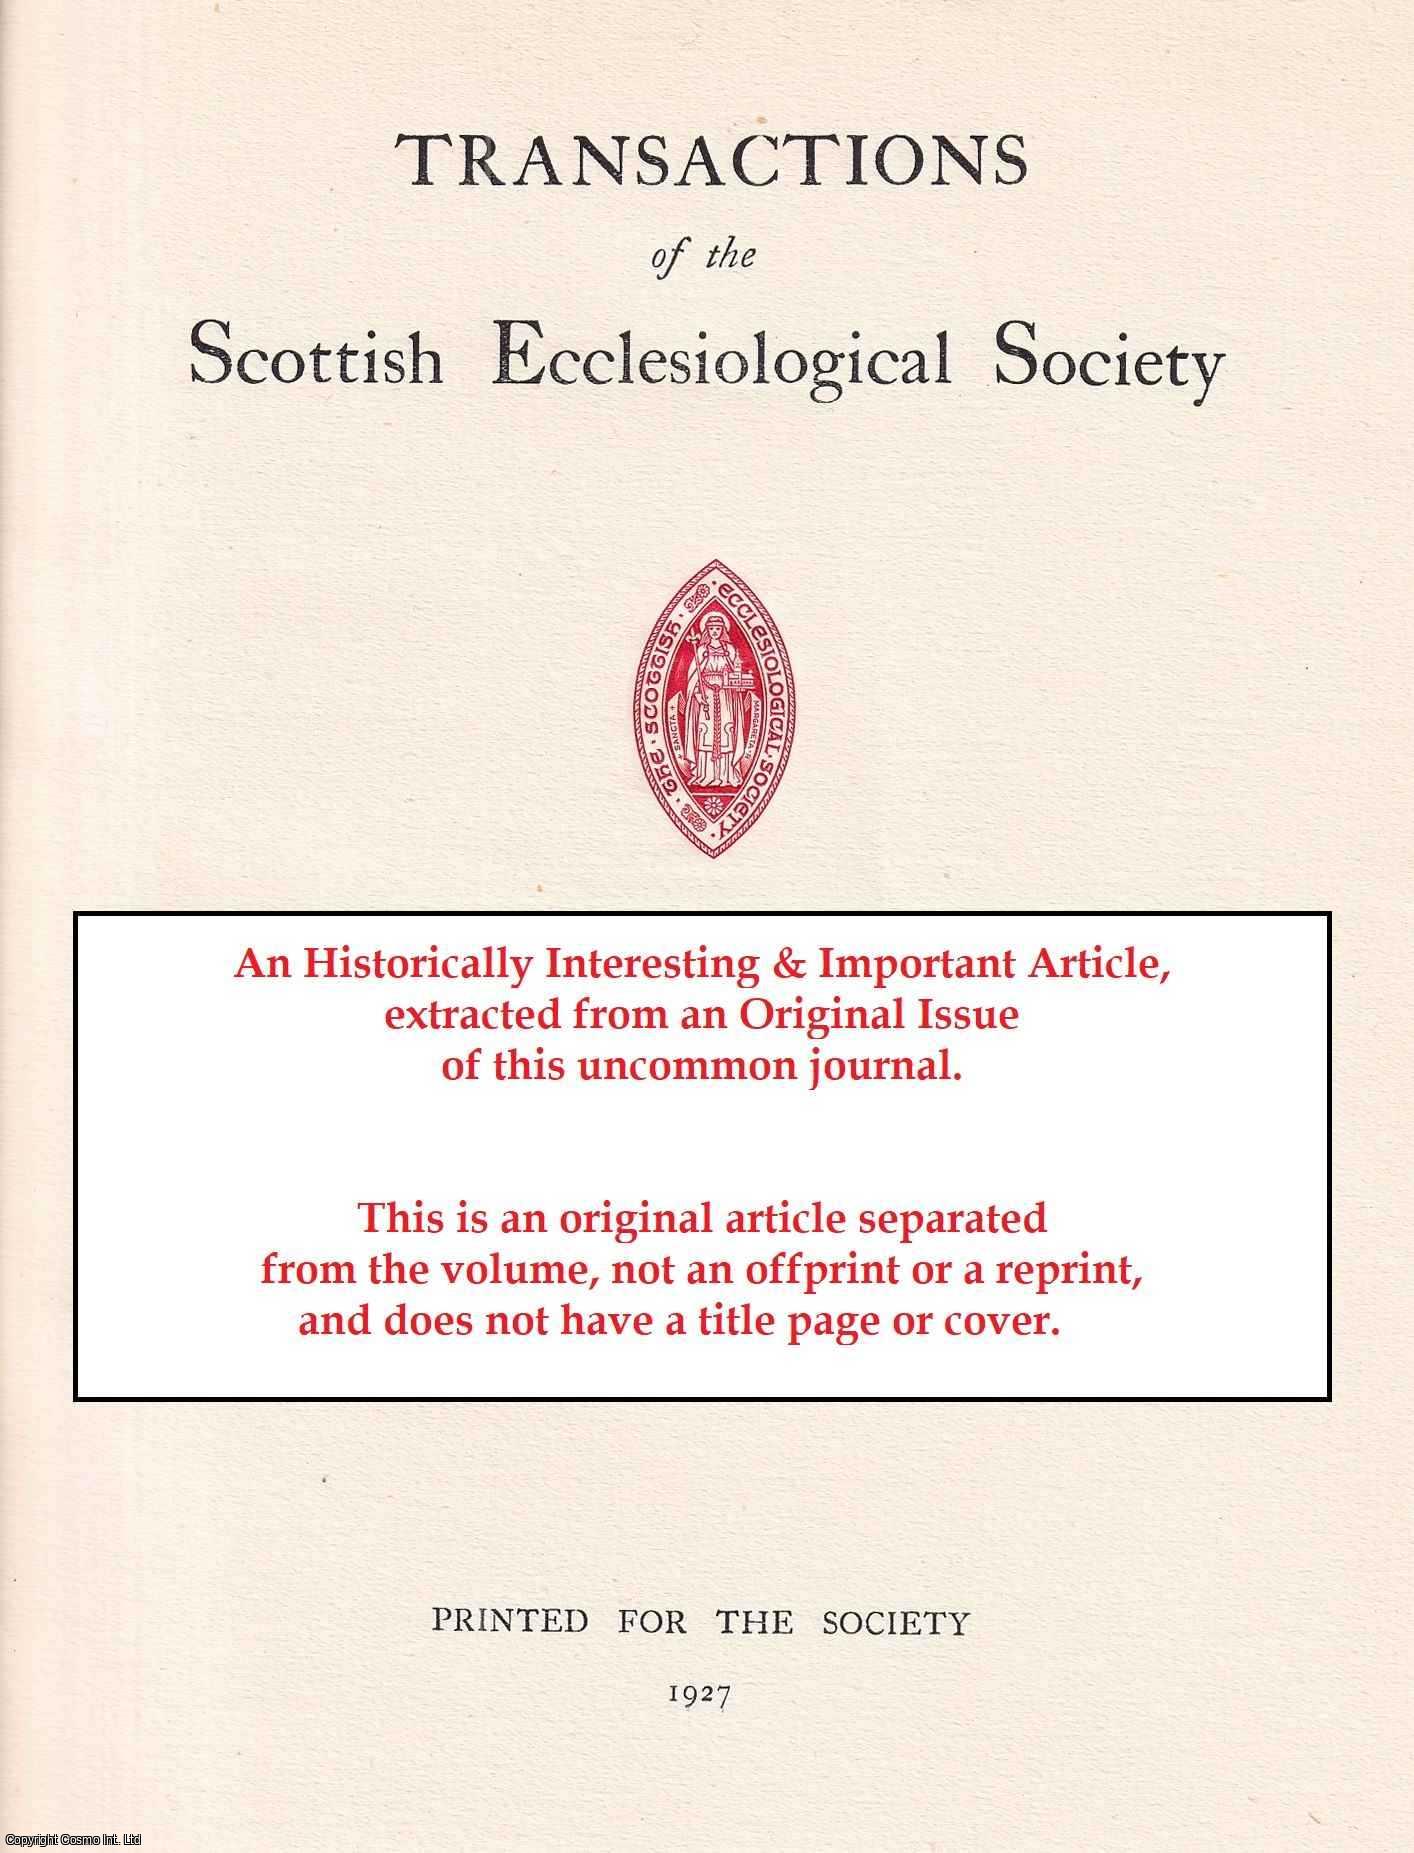 Alexander McGibbon, James Cooper, Thomas Ross and T.S. Robertson - Melrose, Dunglass and Kilbirnie Churches. An original article from the Transactions of the Scottish Ecclesiological Society, 1907.